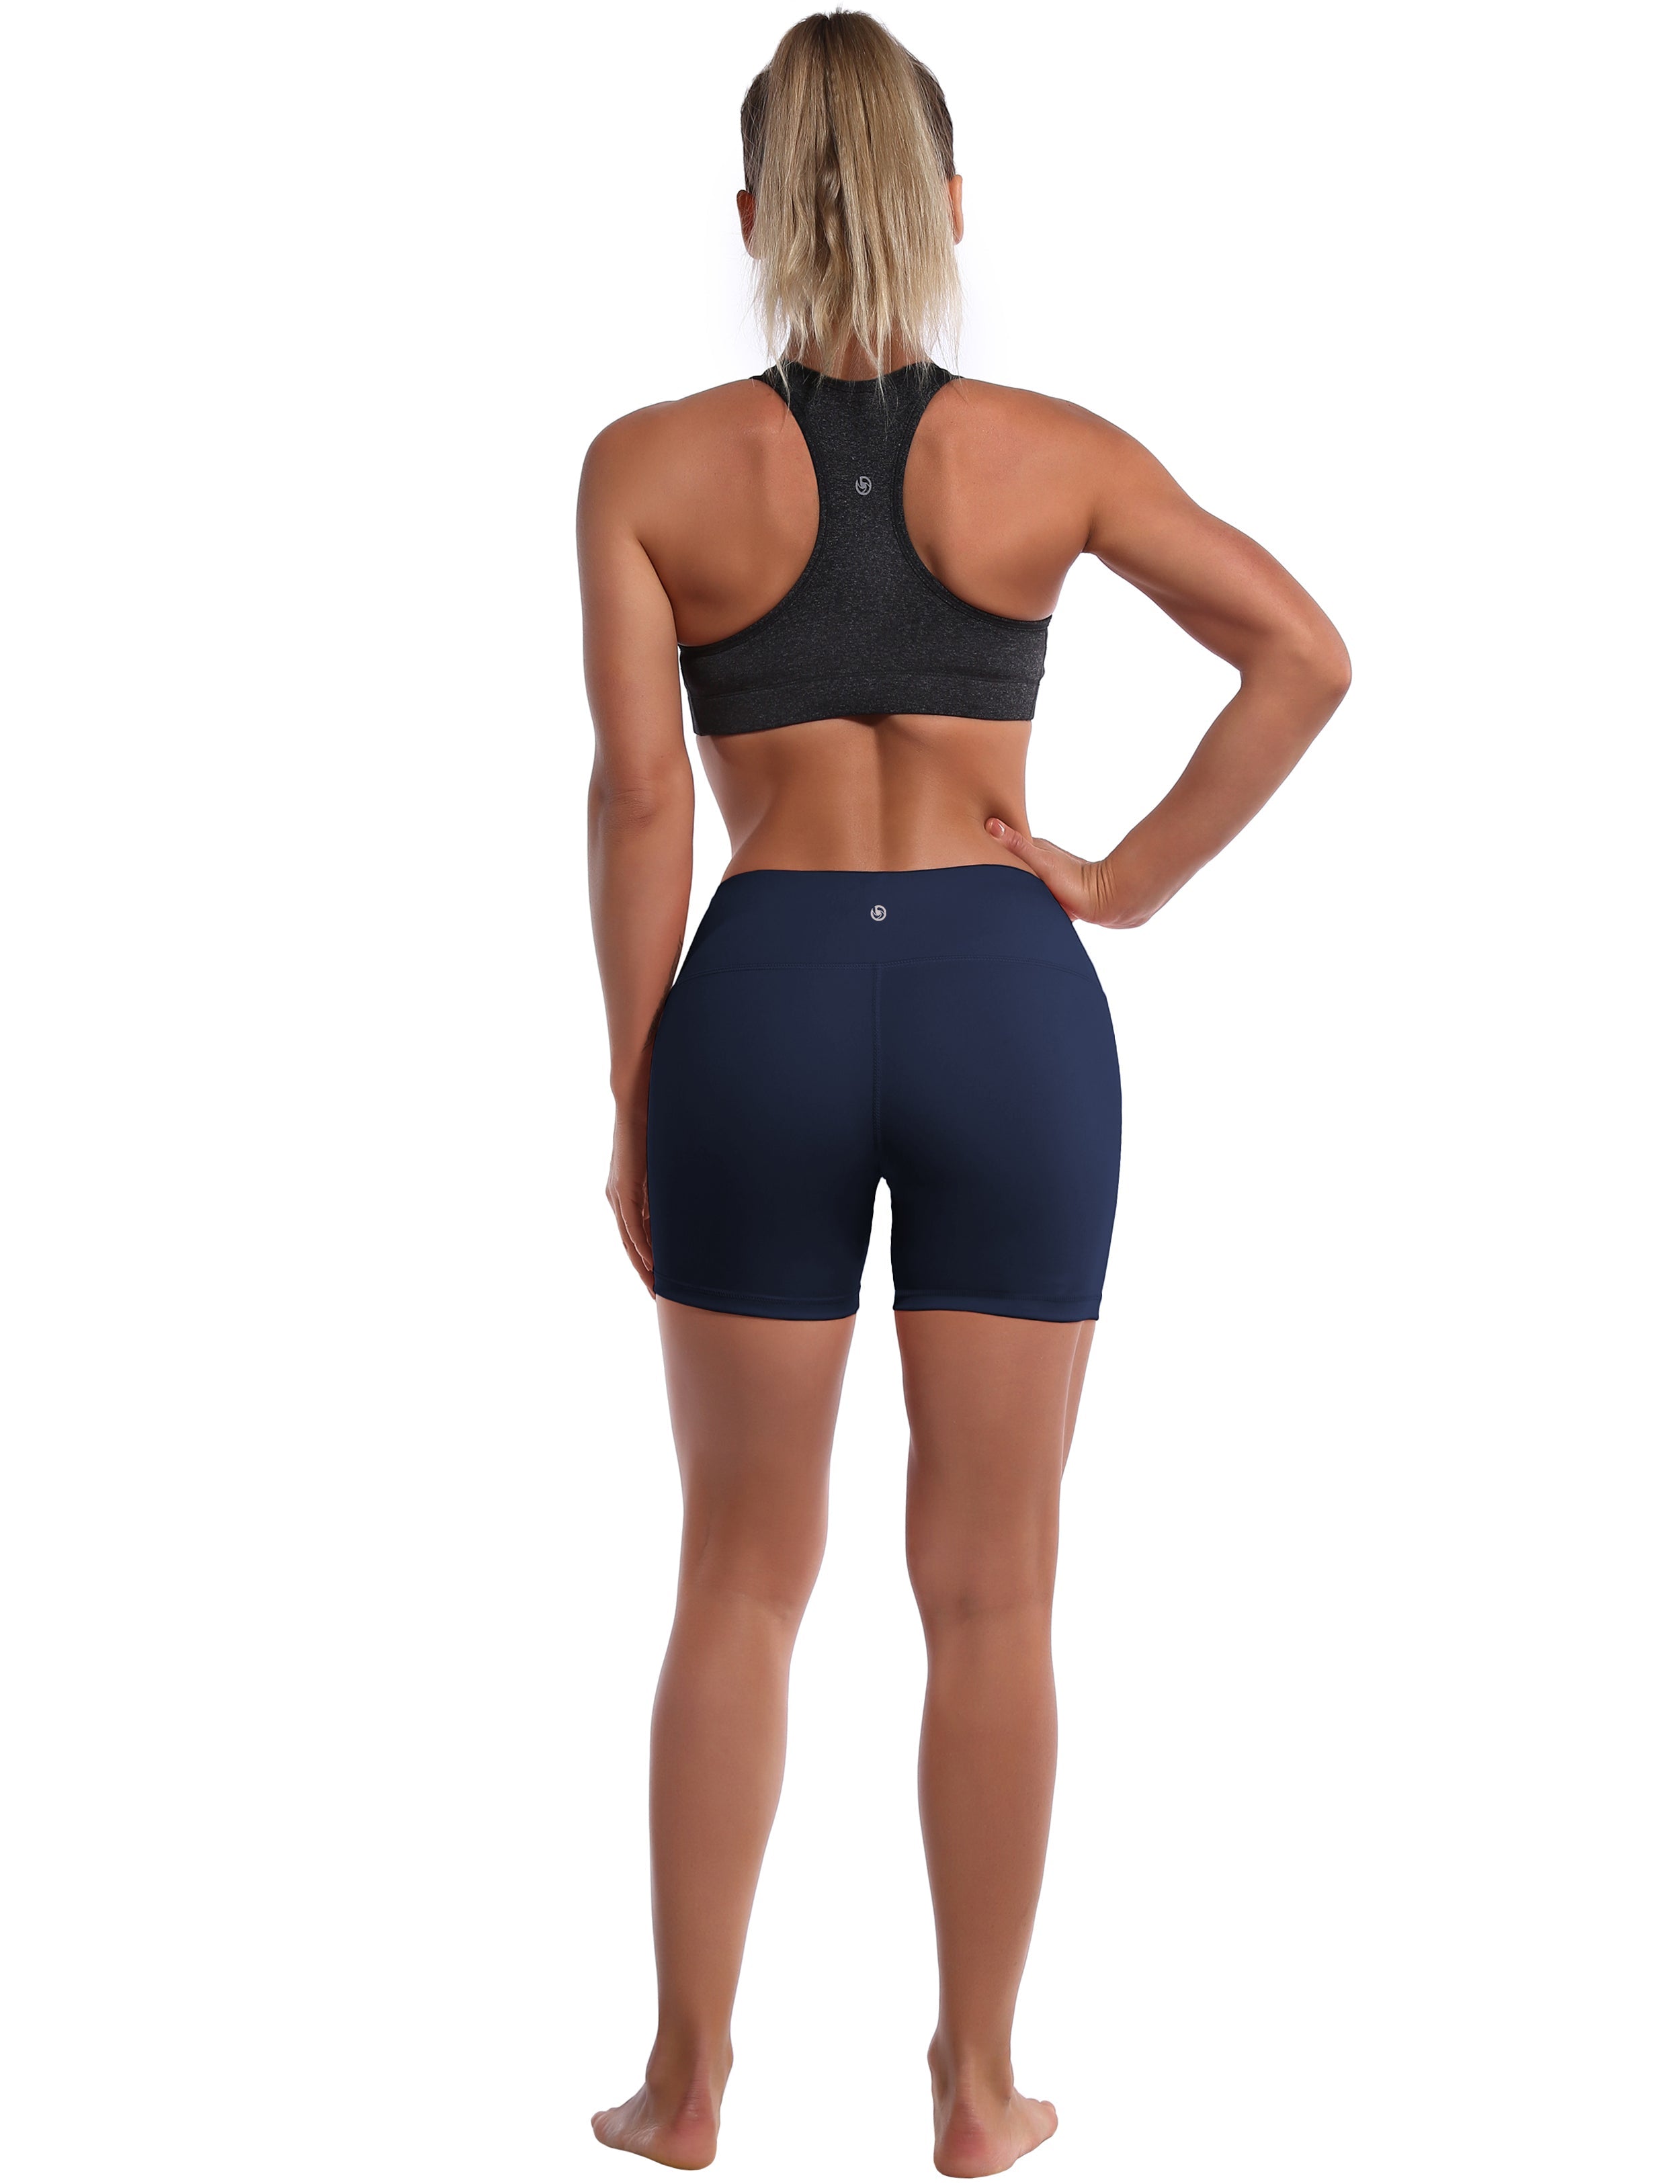 4" Jogging Shorts darknavy Sleek, soft, smooth and totally comfortable: our newest style is here. Softest-ever fabric High elasticity High density 4-way stretch Fabric doesn't attract lint easily No see-through Moisture-wicking Machine wash 75% Nylon, 25% Spandex